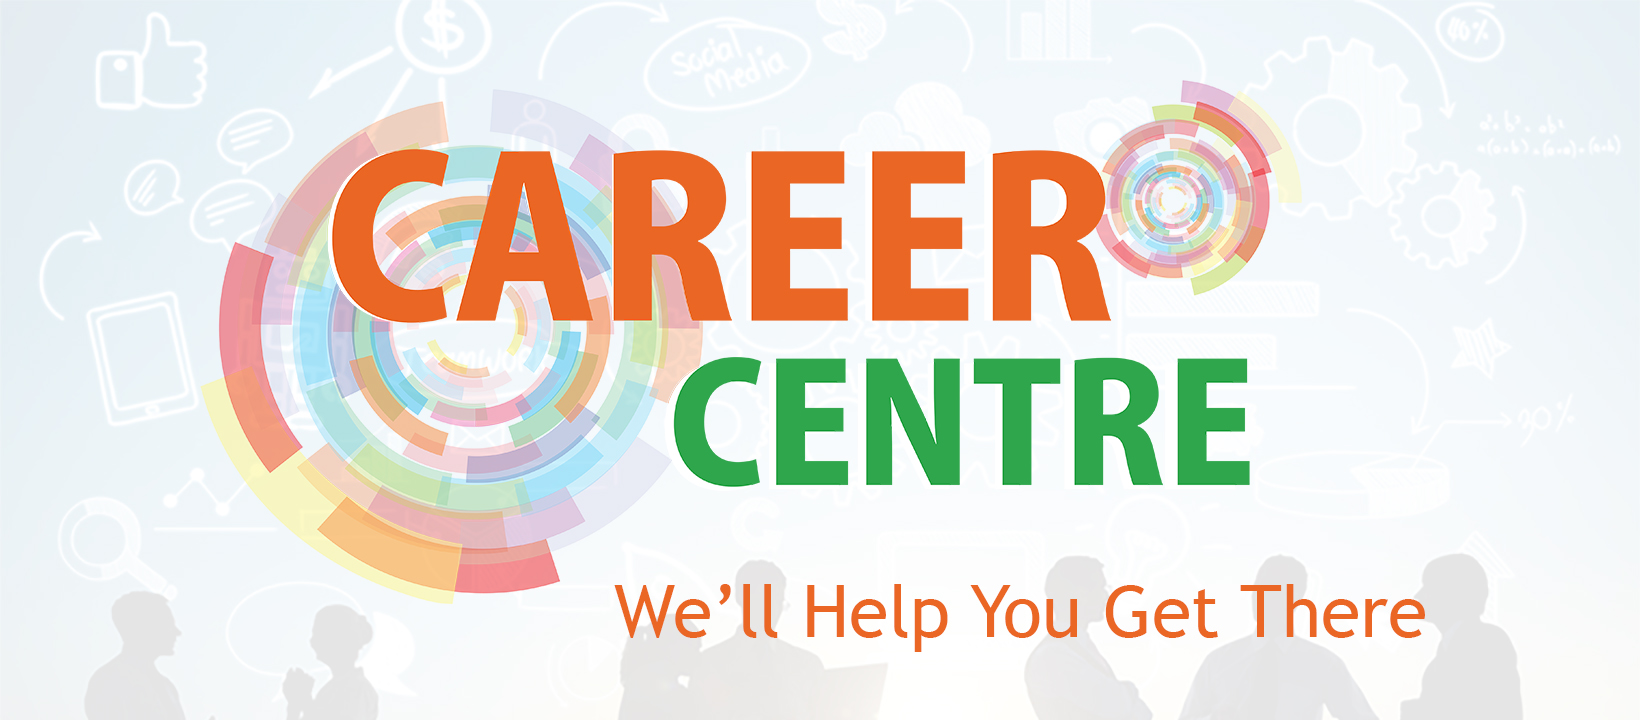 Career Centre We'll help you get there